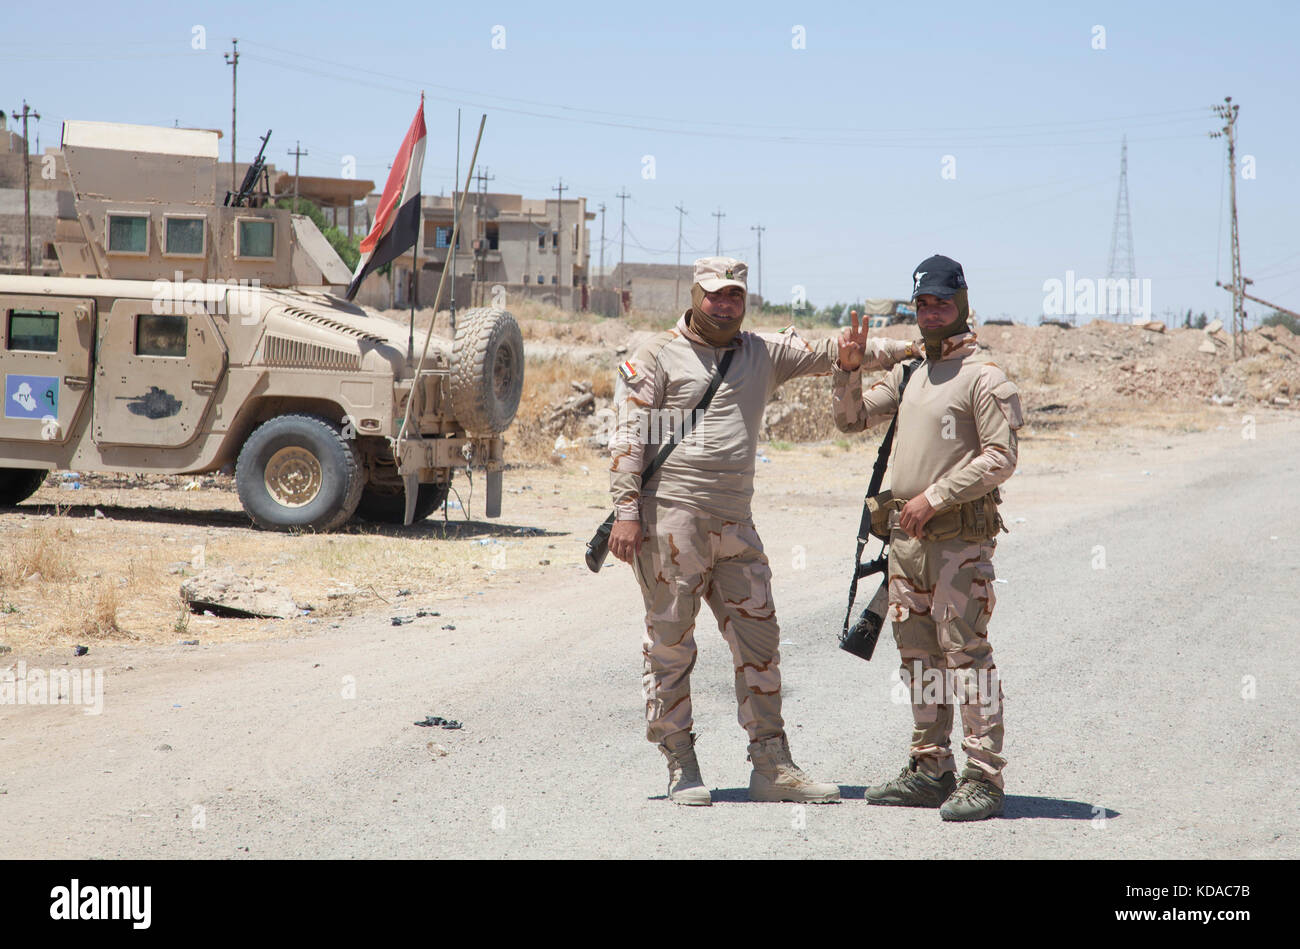 Iraqi Army soldiers greet a convoy of U.S. soldiers May 25, 2017 in Mosul, Iraq. There has been a combined effort between U.S. and Iraqi forces in the area to defeat ISIS extremists. Stock Photo